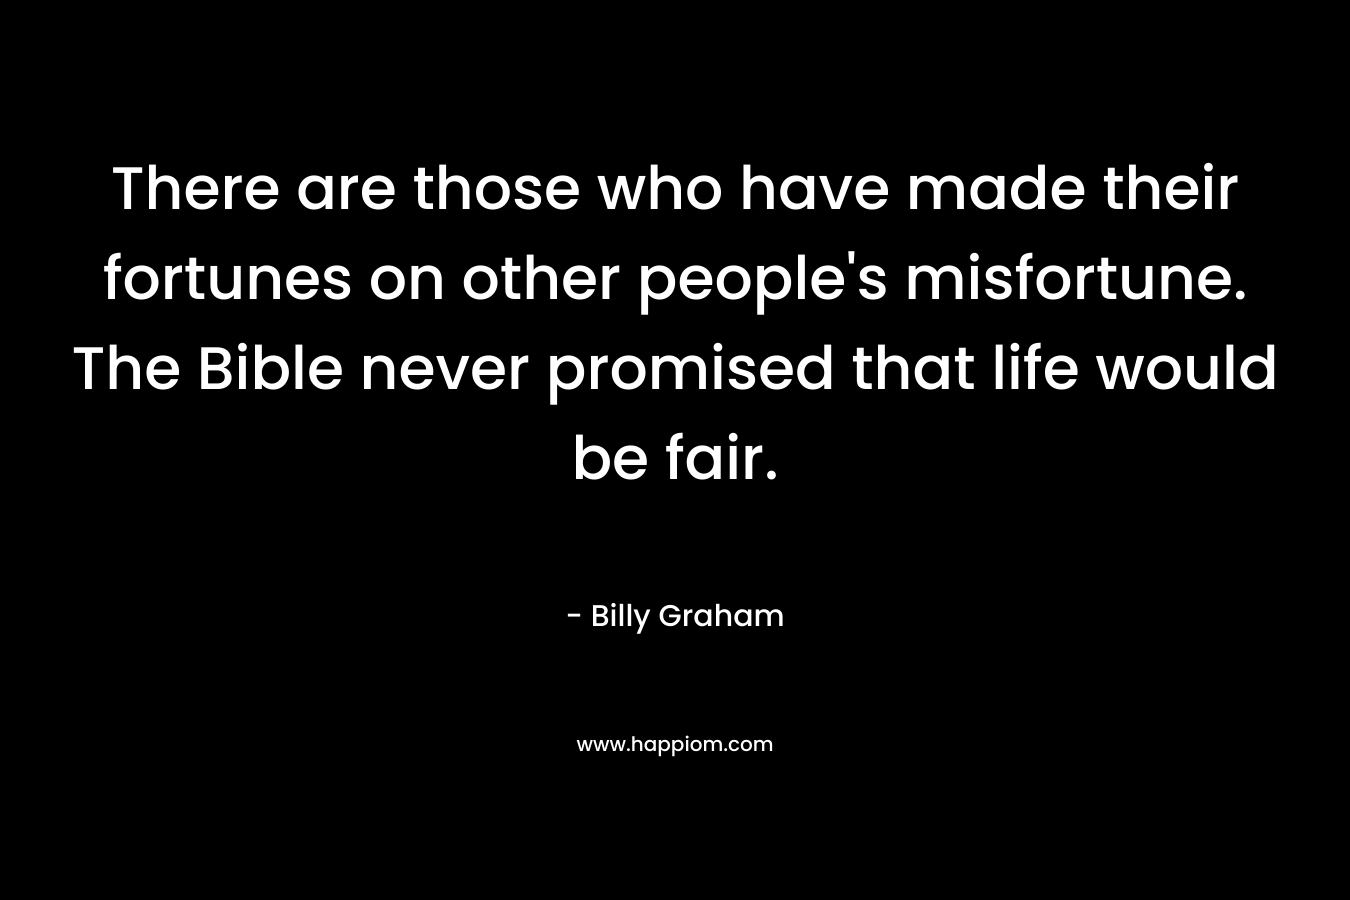 There are those who have made their fortunes on other people’s misfortune. The Bible never promised that life would be fair. – Billy Graham